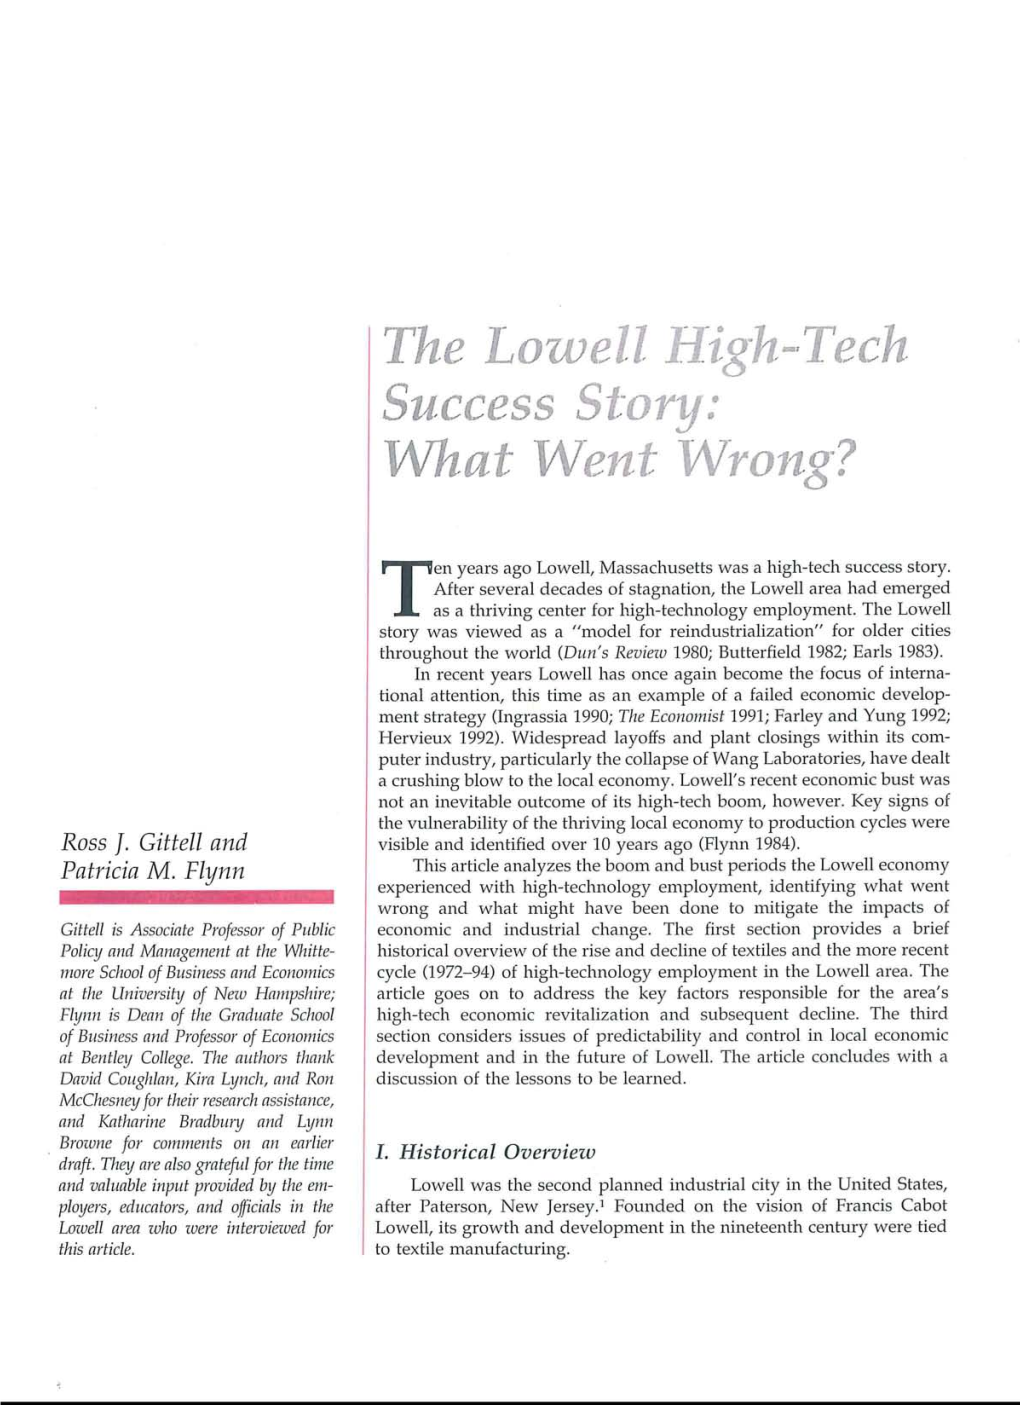 The Lowell High- Tech Success Story